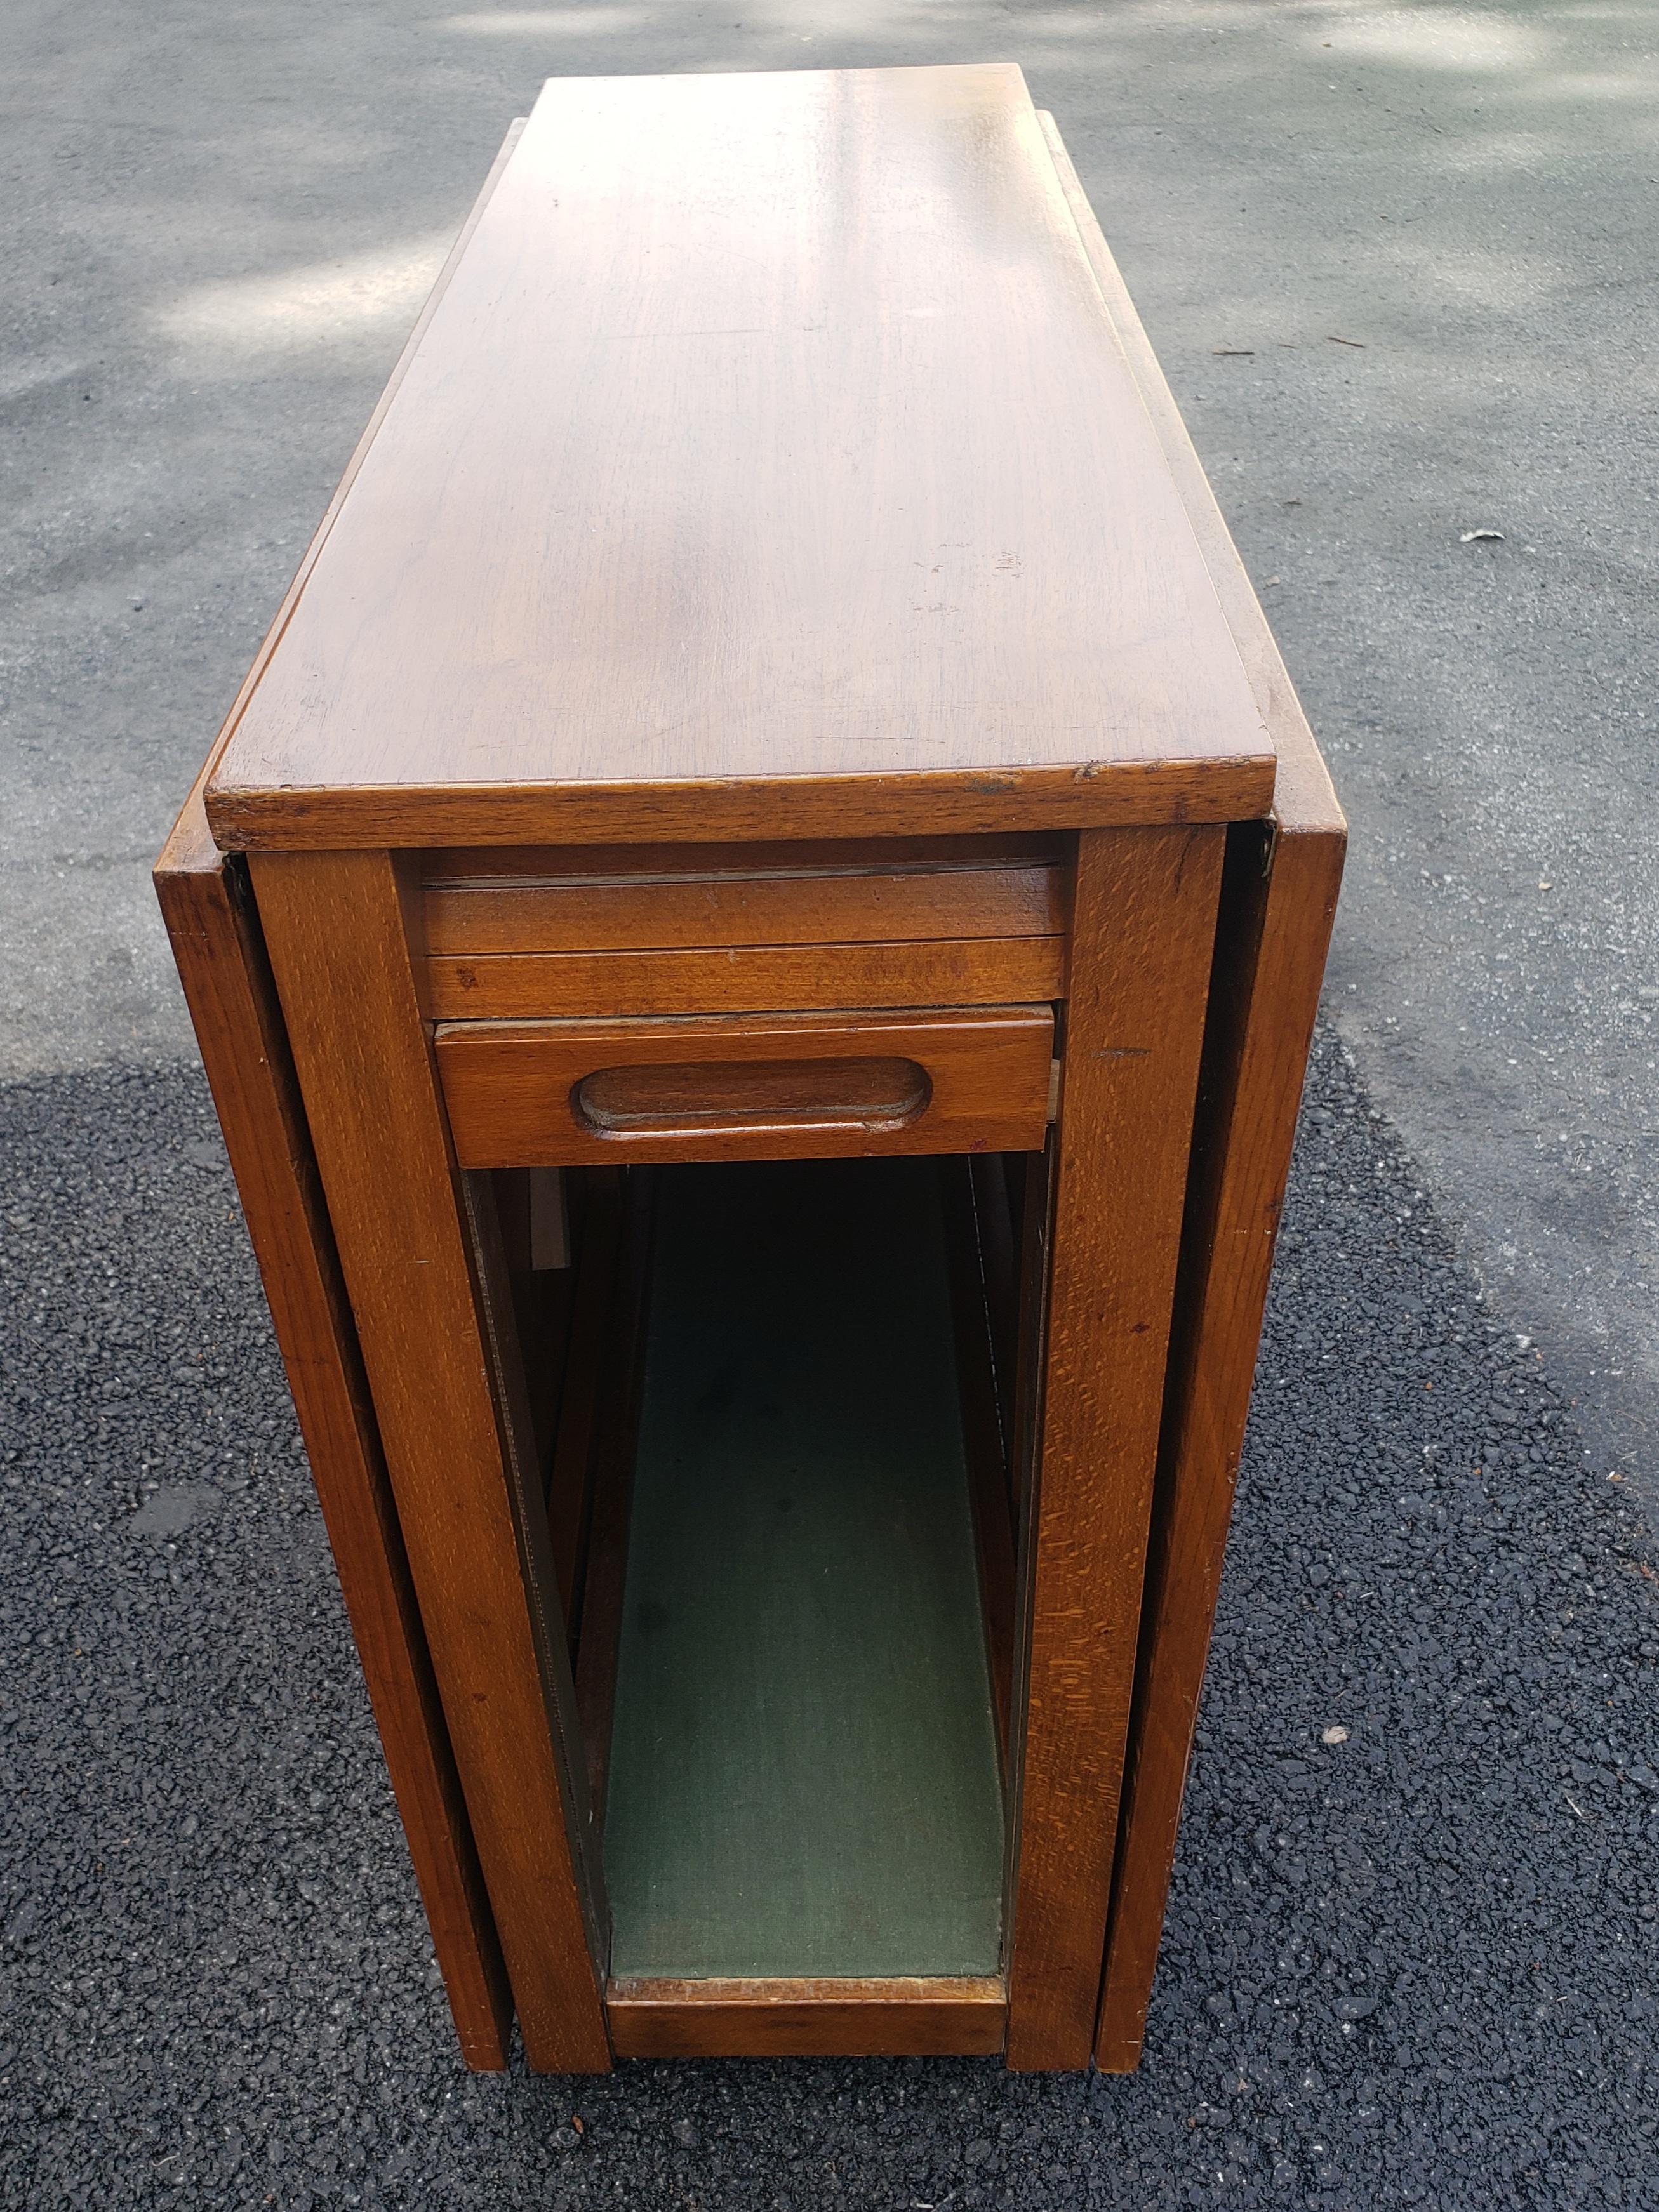 Mid-Century Danish Modern Teak Drop-Leaf Dining Table with Storage on Rollers For Sale 7